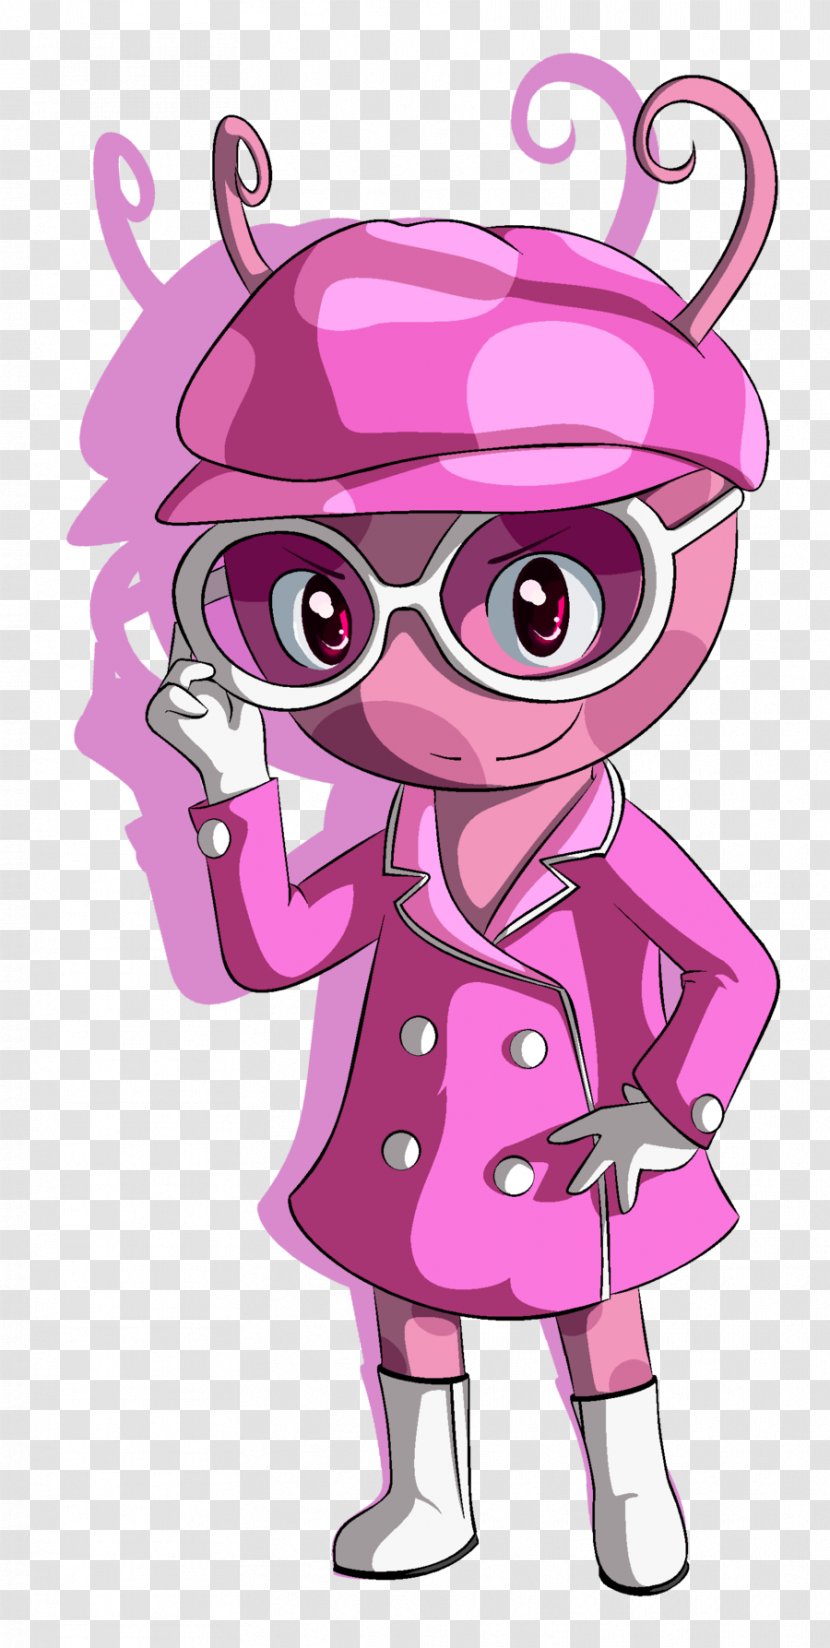 Uniqua Lady In Pink Nick Jr. Drawing Front Page News! - Flower - Heart Transparent PNG